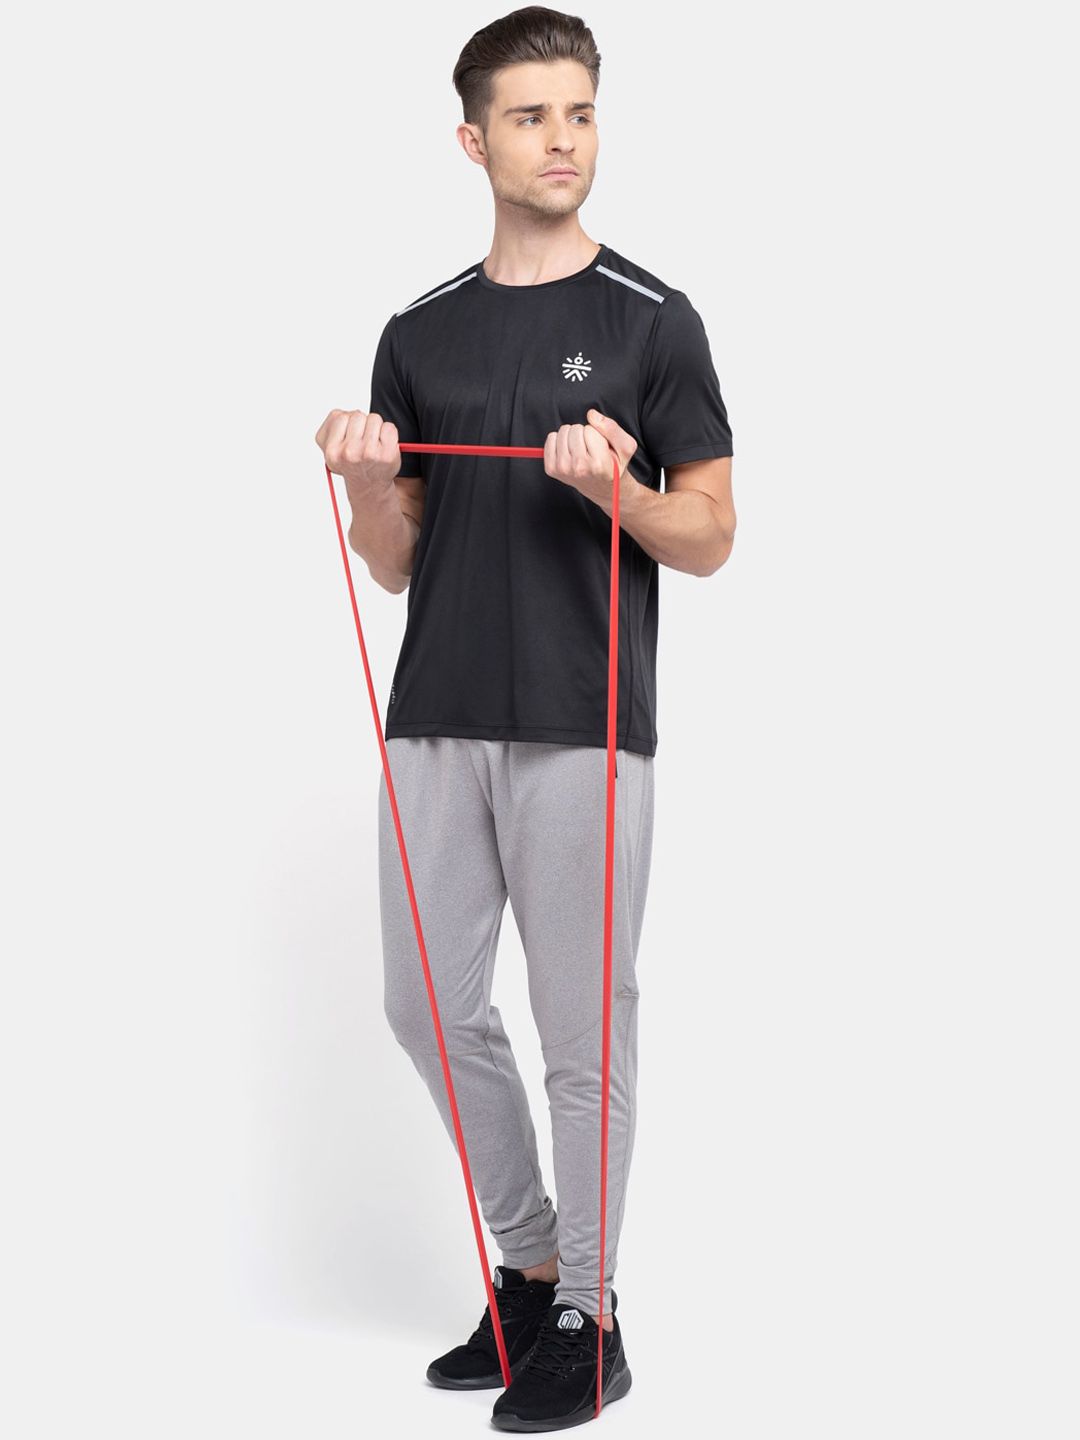 Cultsport Unisex Red Powerloop Resistance Band Price in India